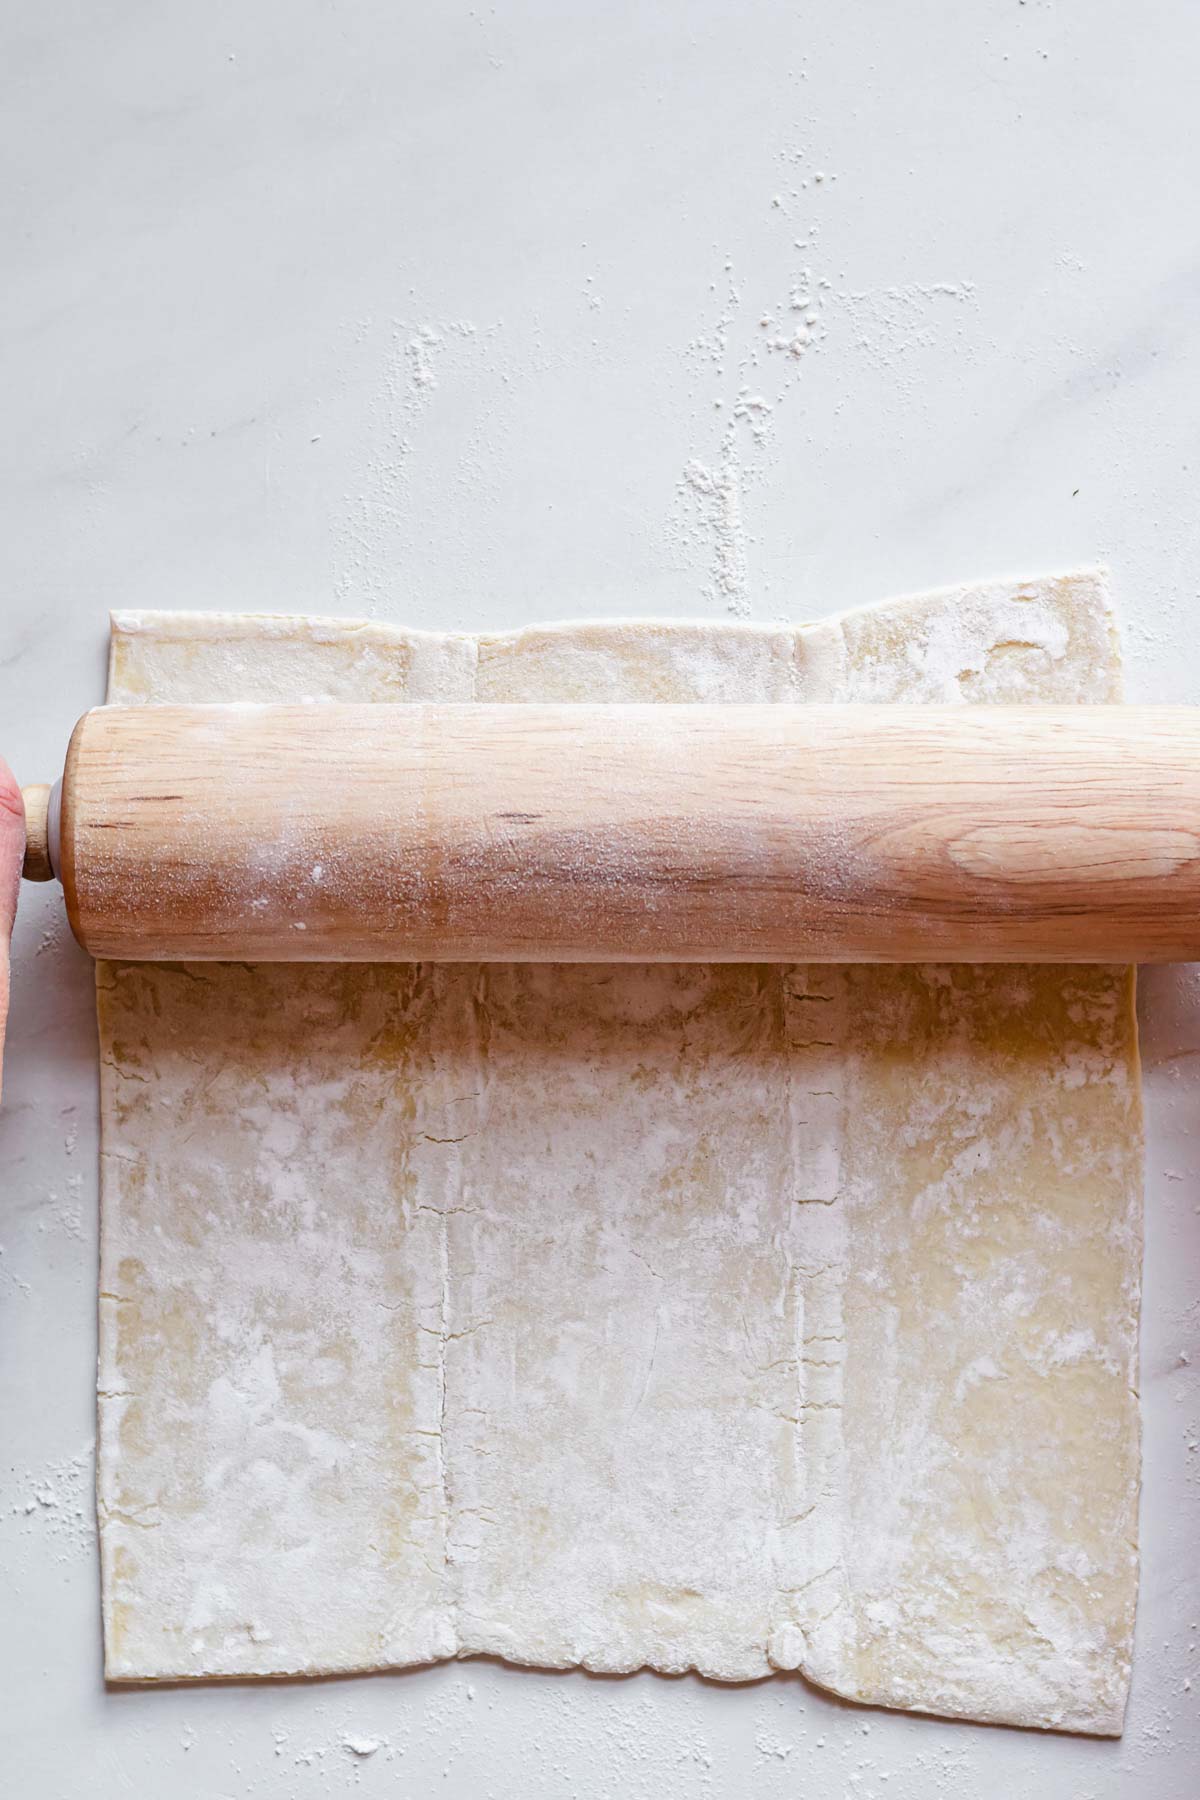 Rolling out the puff pastry.